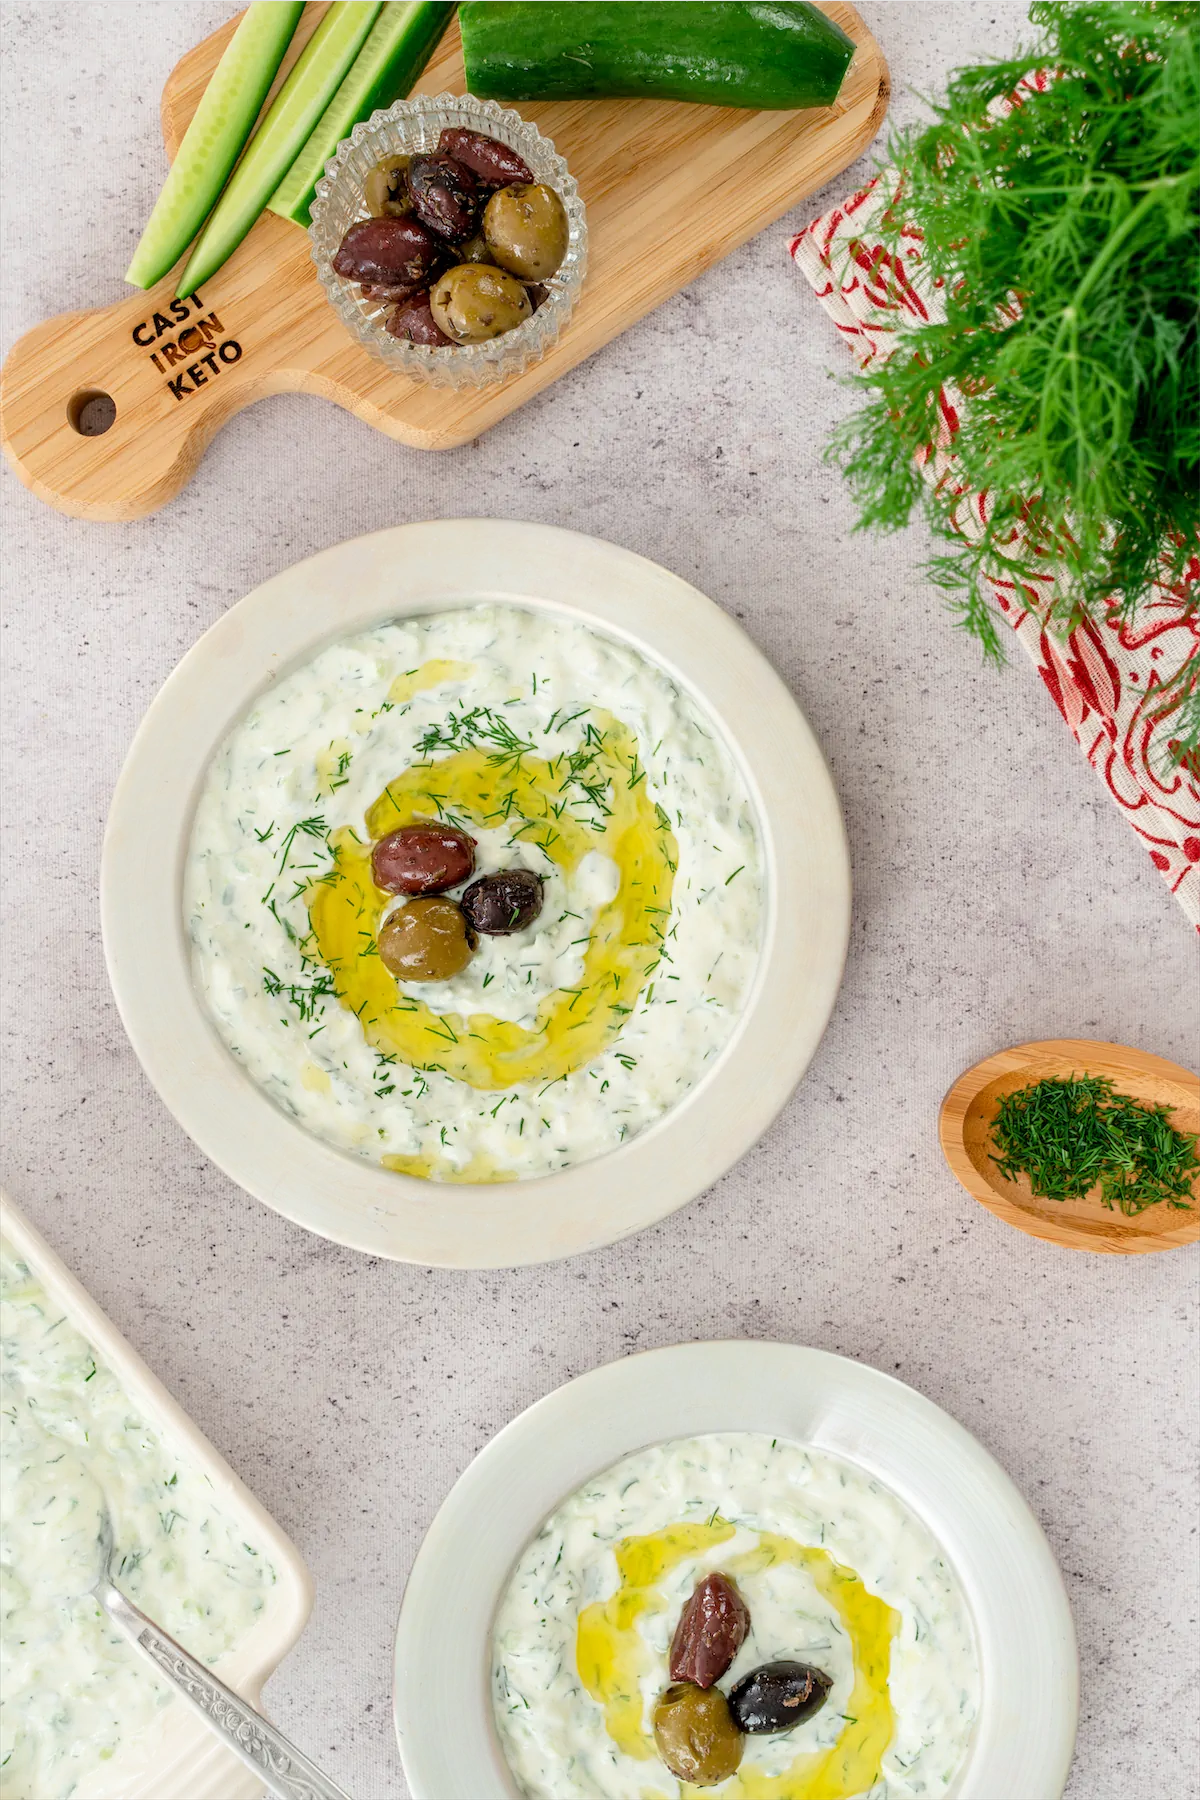 A tasty keto tzatziki recipe with olives, artfully arranged on a clean white plate